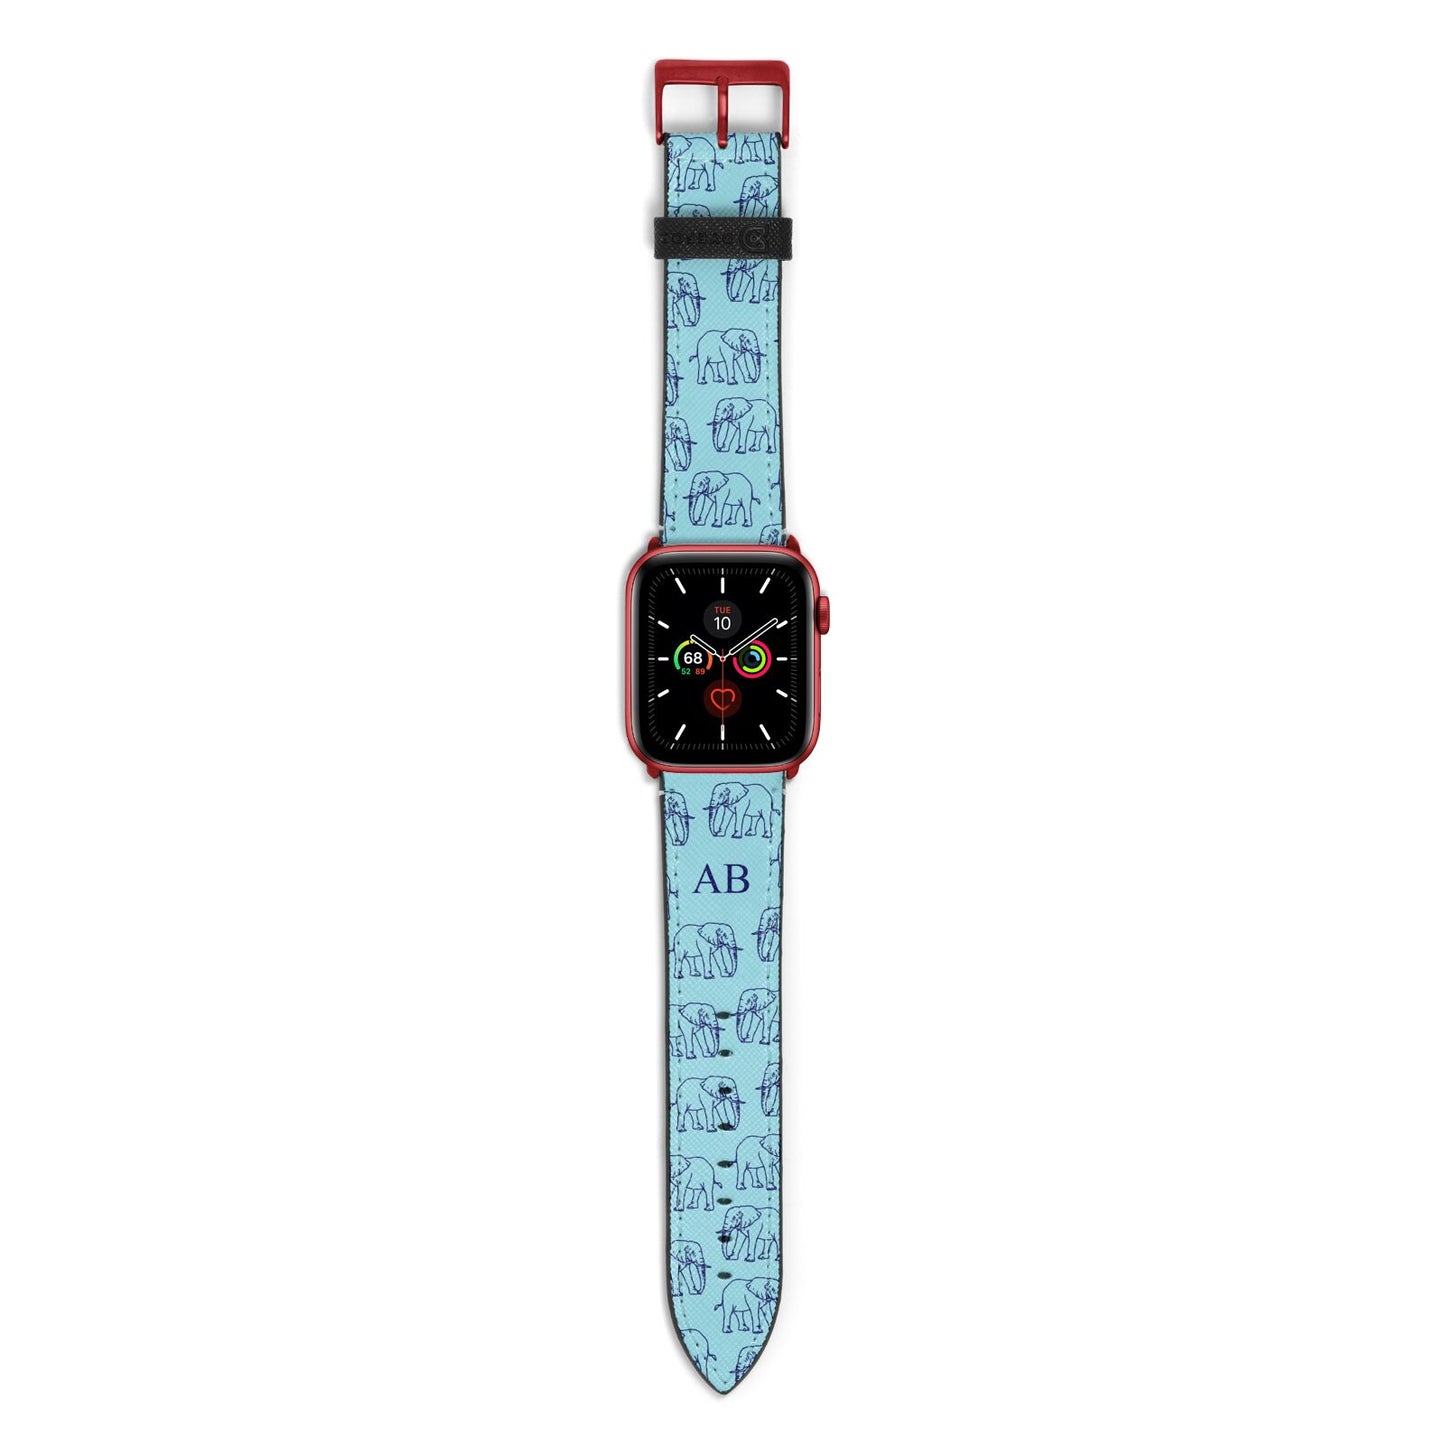 Custom Elephant Apple Watch Strap with Red Hardware